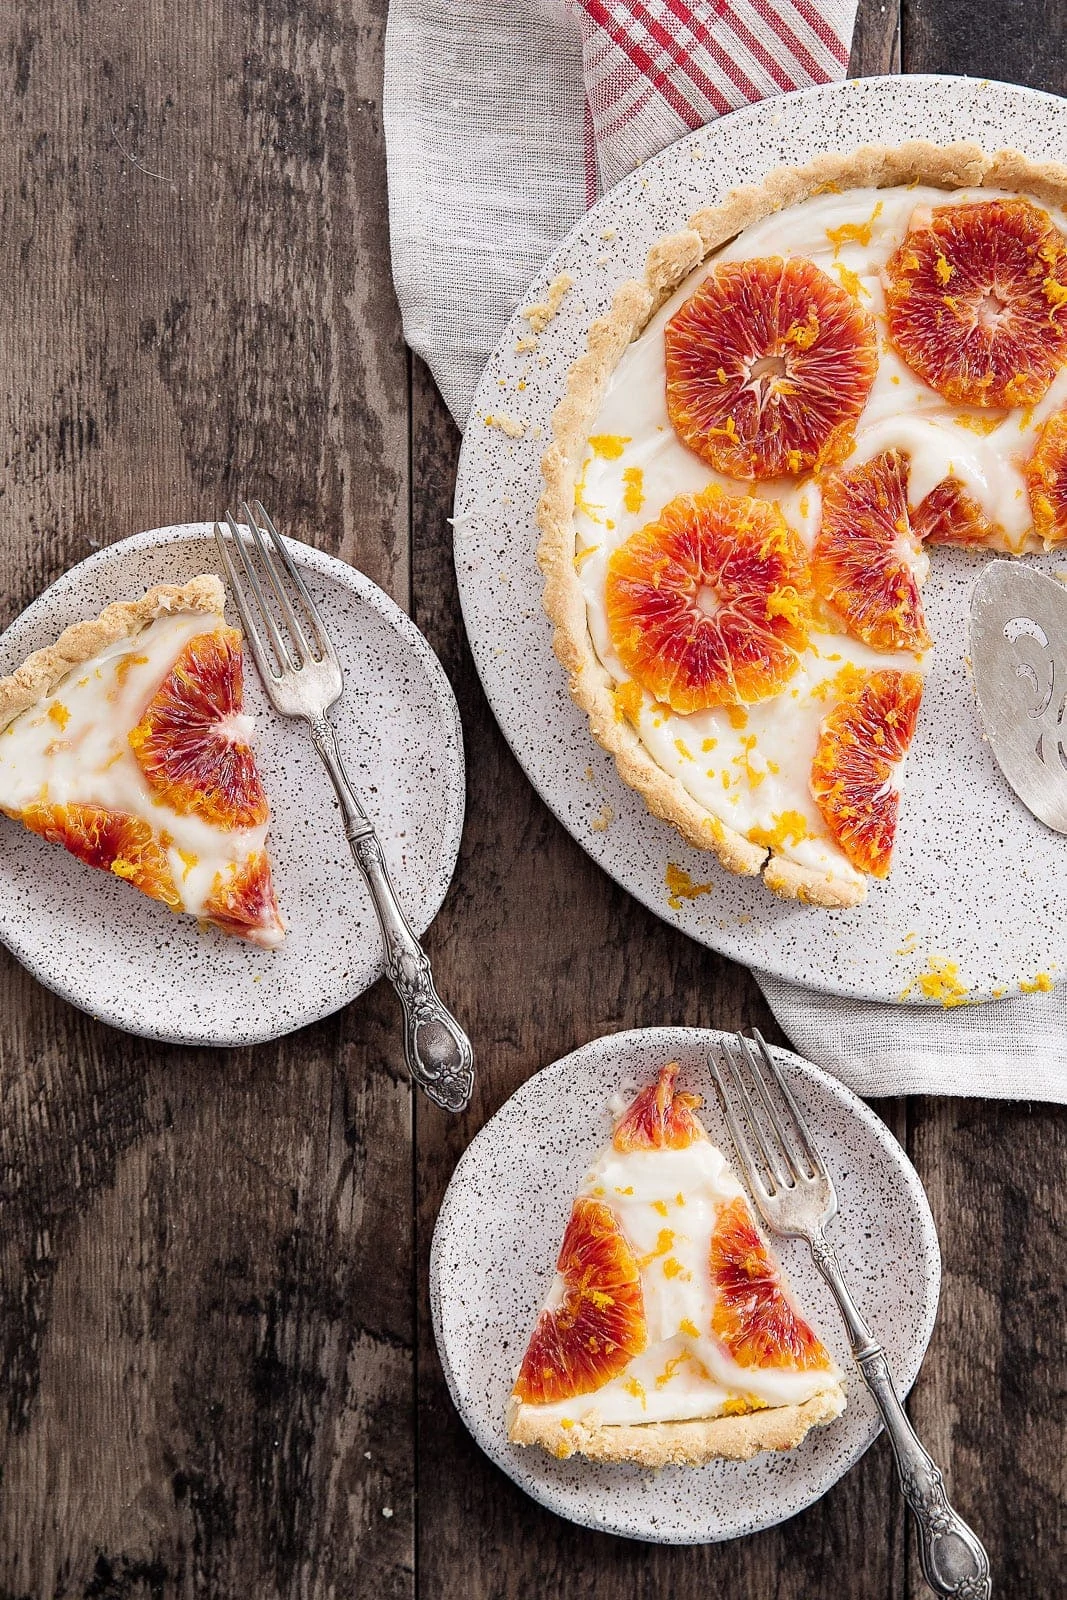 A flakey tart with cream cheese filling and topped with candied ginger blood oranges